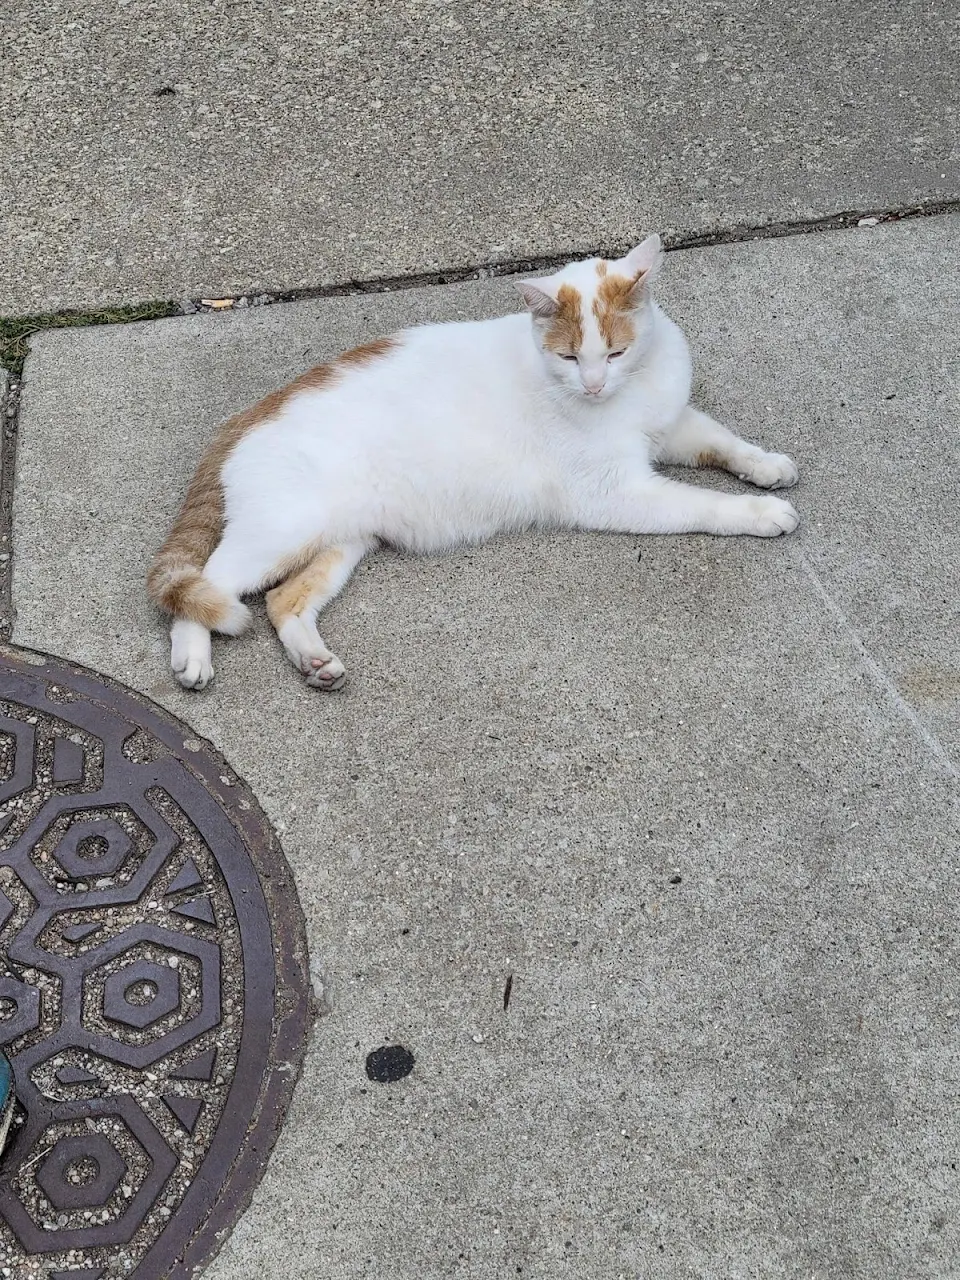 local donut shop cat hangs out on the corner waiting for strangers to stop and pet him